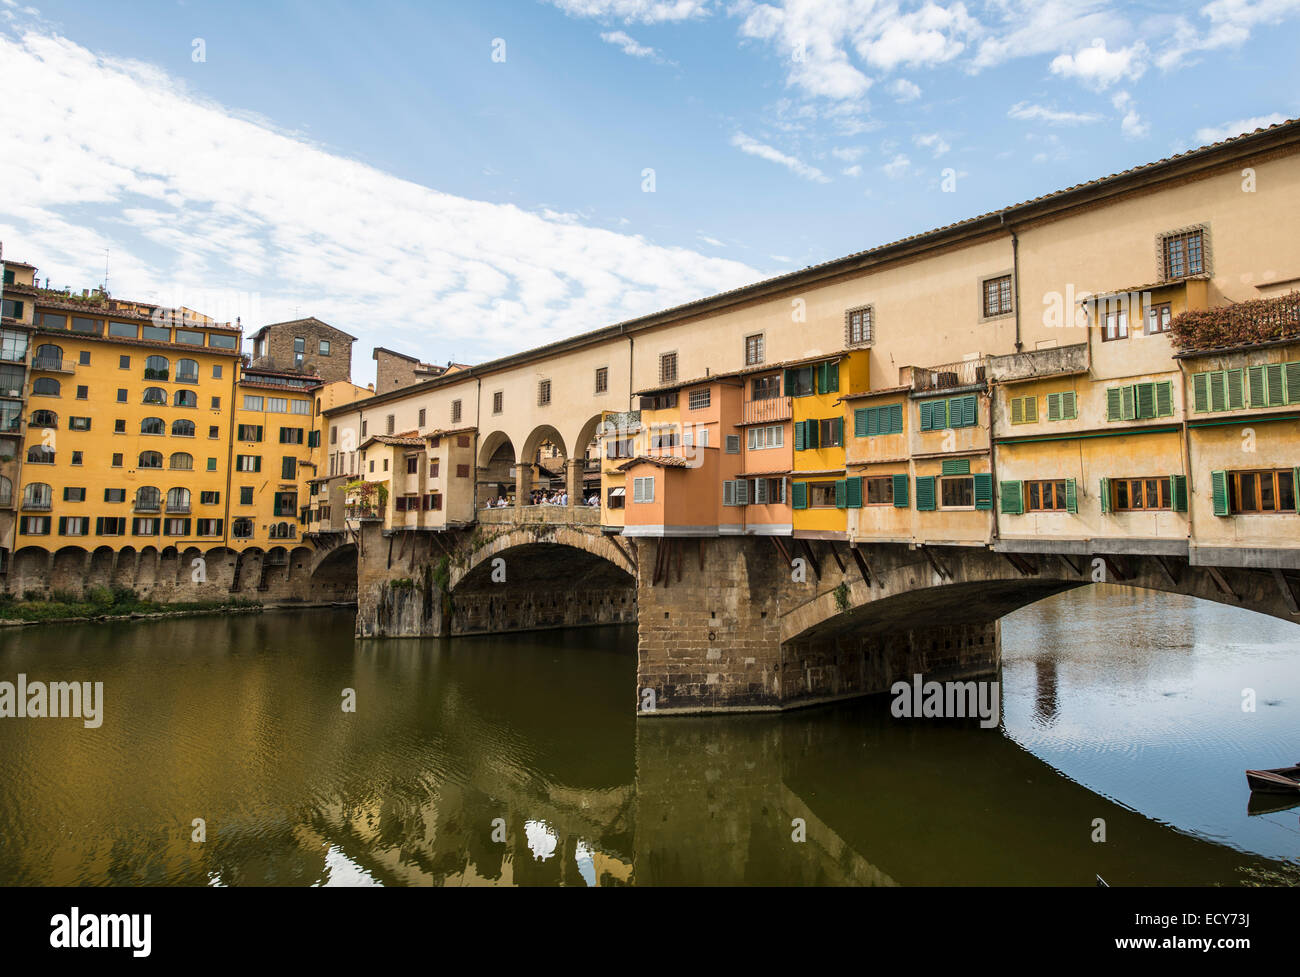 Historic centre of Florence with Ponte Vecchio over the Arno River, UNESCO World Heritage Site, Florence, Tuscany, Italy Stock Photo